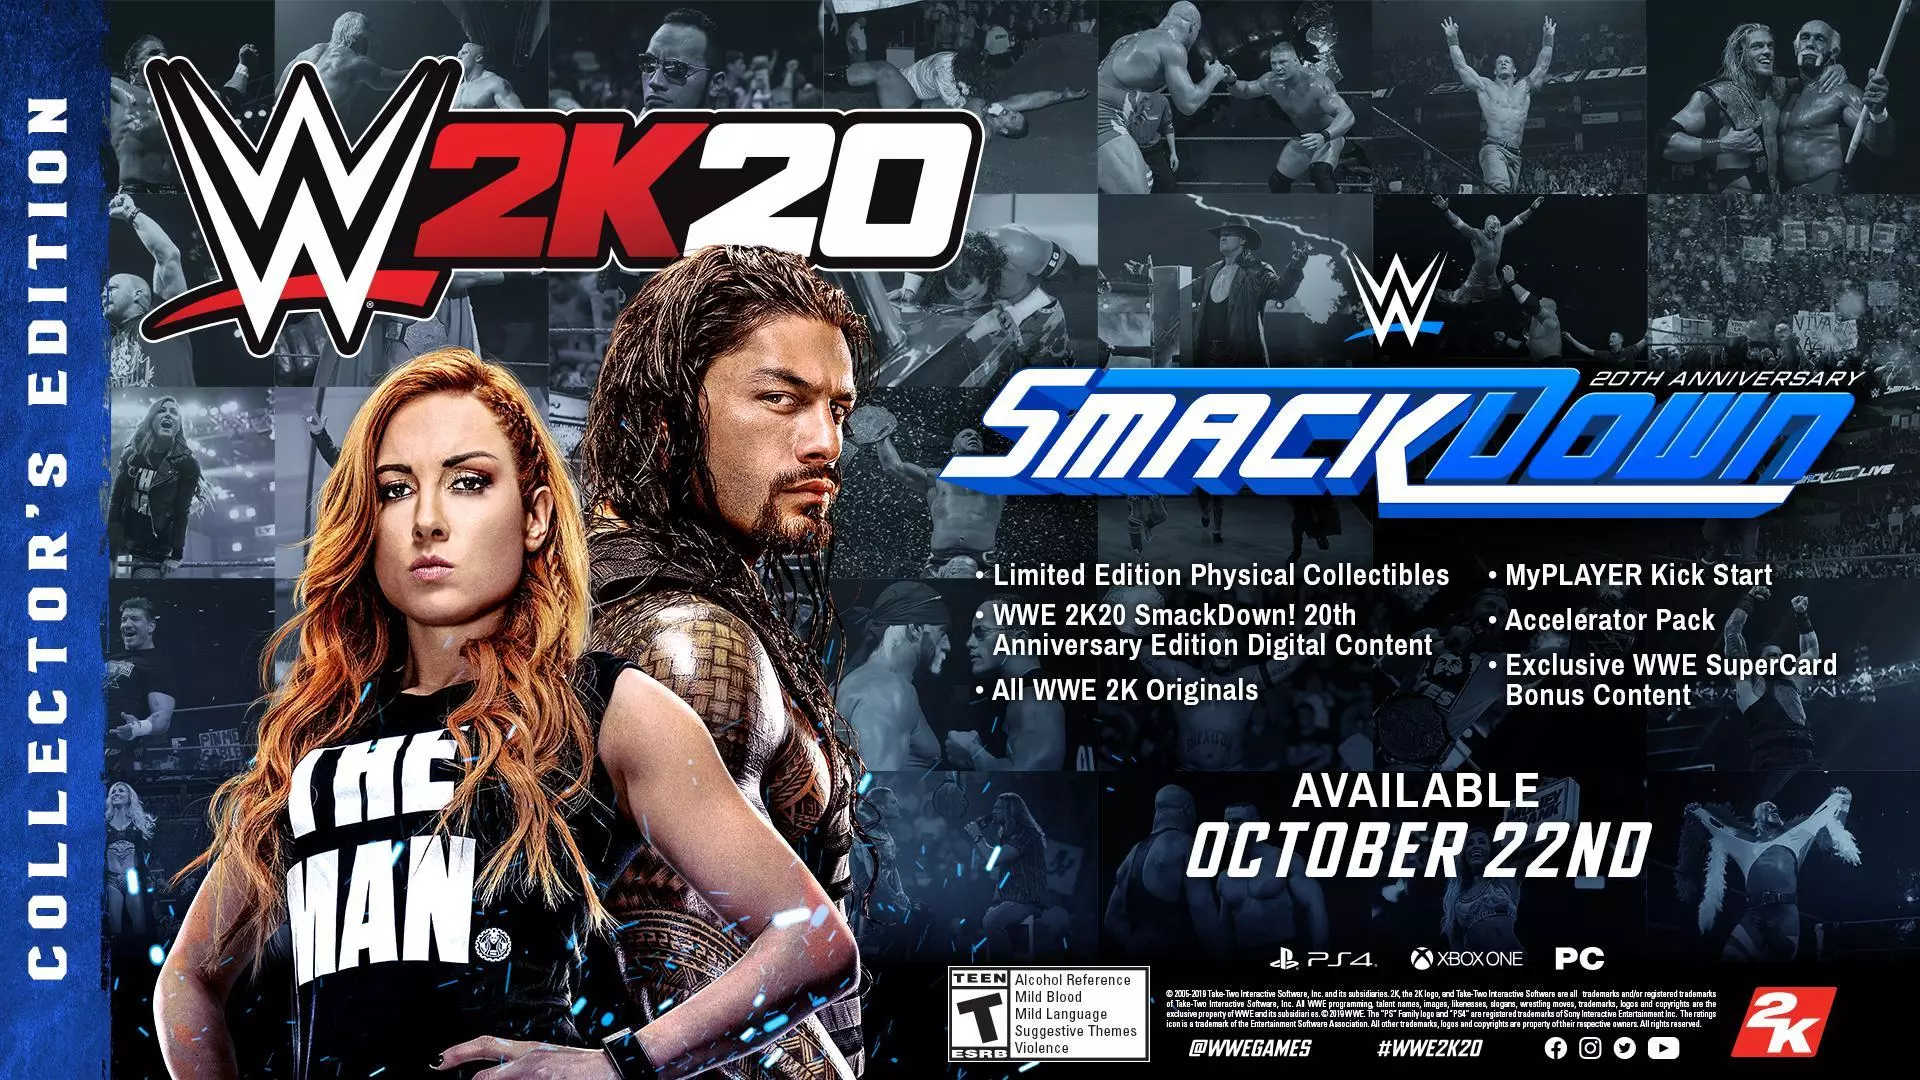 WWE 2K20 Editions Collector's SmackDown Edition